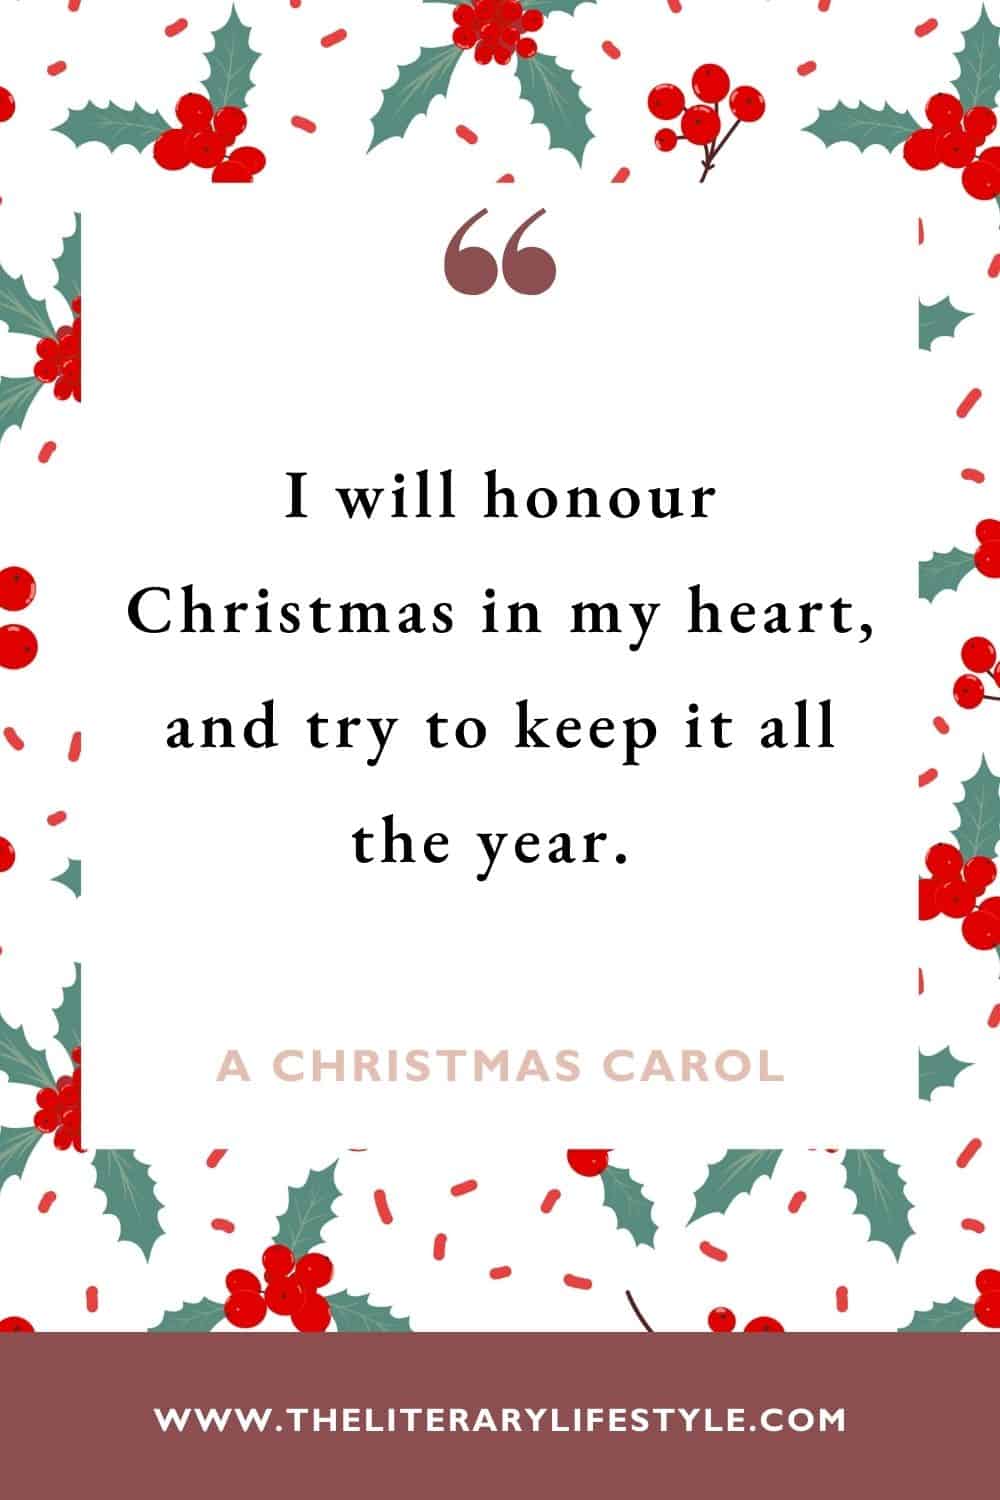 a christmas carol quote by charles dickens